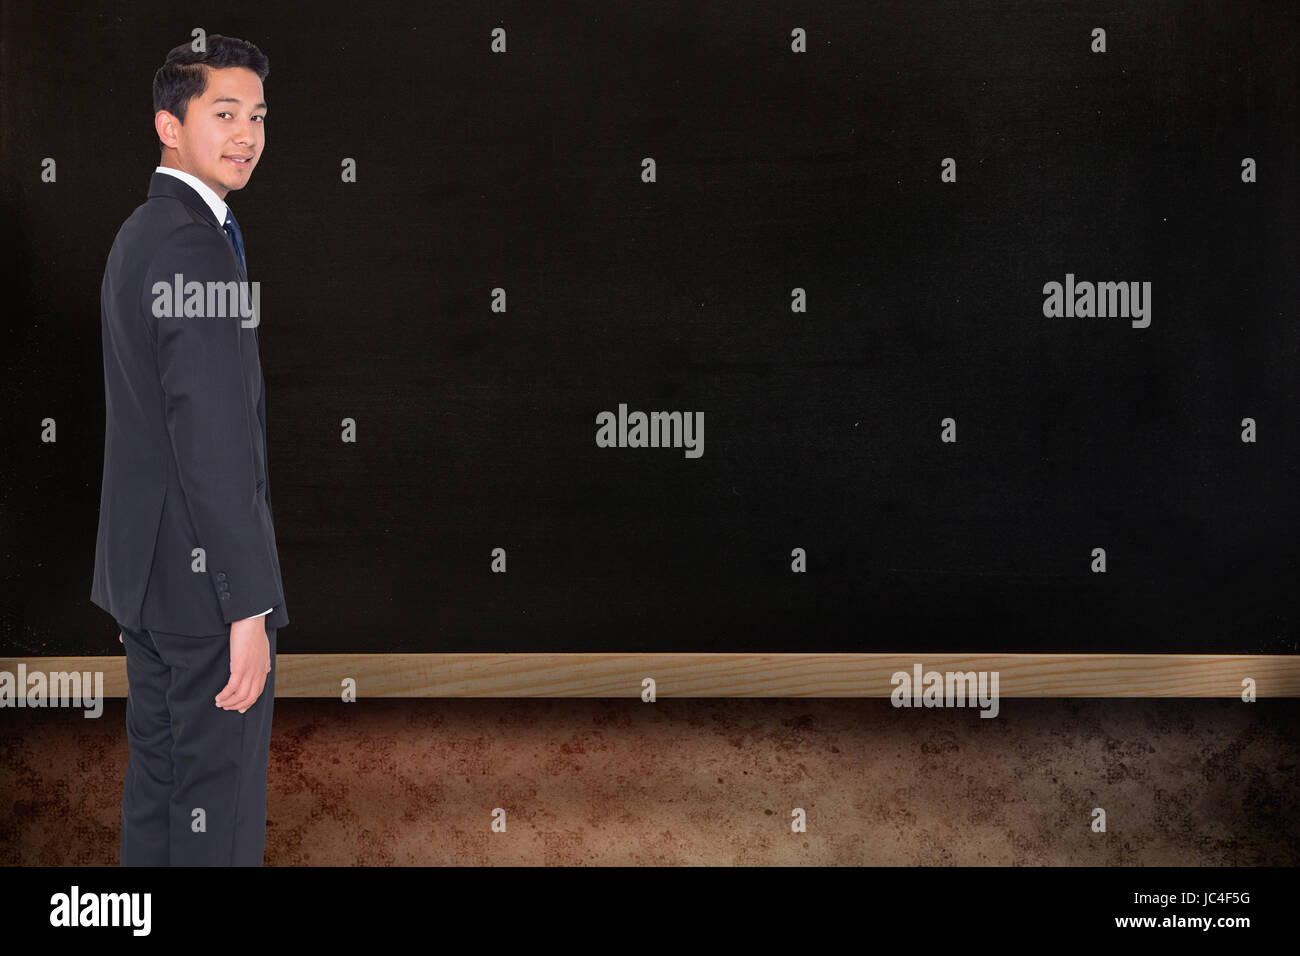 Composite image of businessman looking at camera Banque D'Images